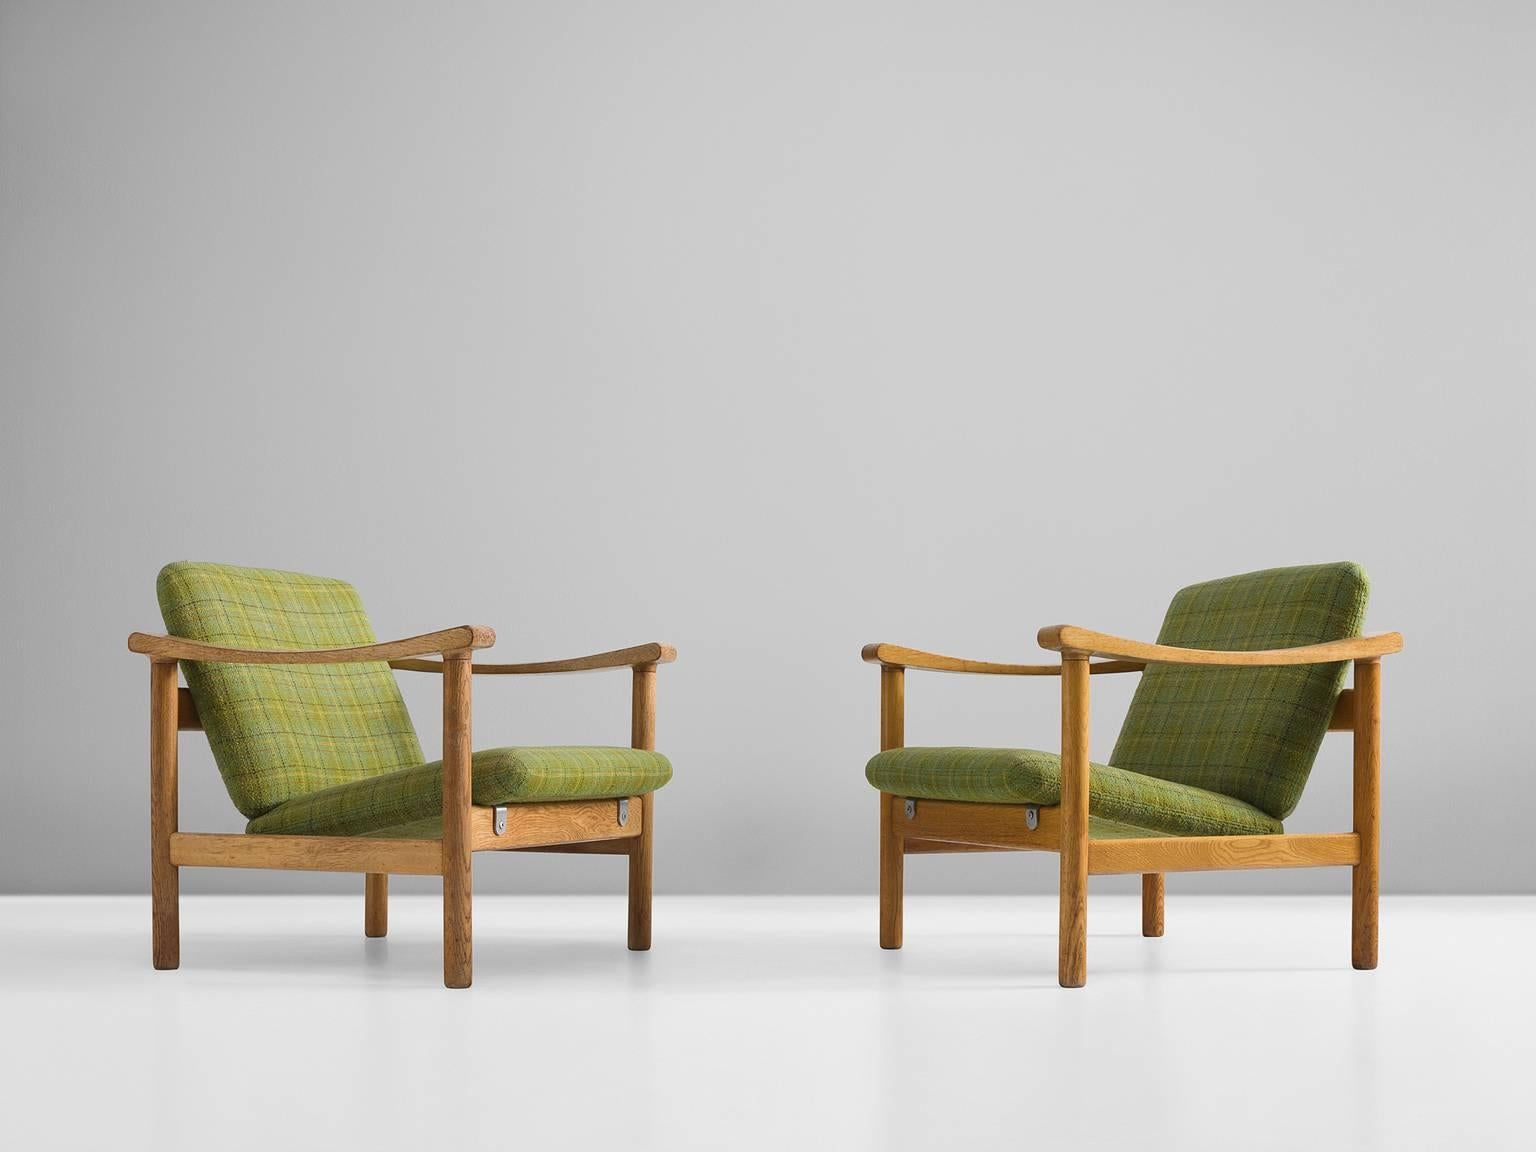 Set of GE280 lounge chairs, green checked fabric and oak, Hans Wegner for Getama, Denmark, 1950s

This Danish set of lounge chairs is both clean and minimalistic in its design. At the same time these two chair feature specific details in order to